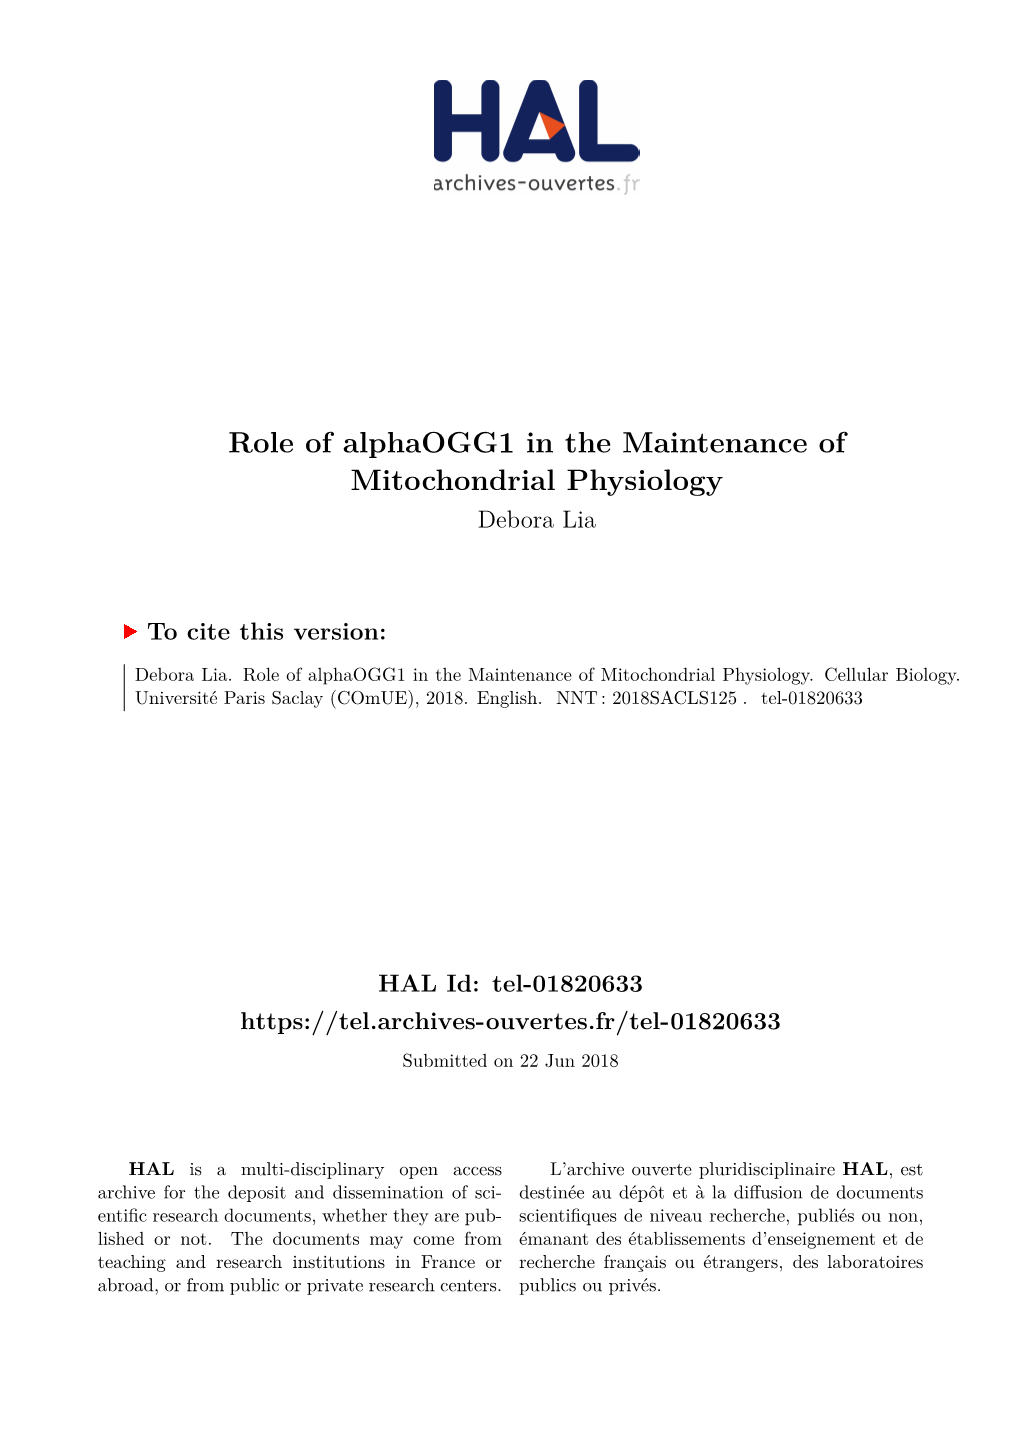 Role of Alphaogg1 in the Maintenance of Mitochondrial Physiology Debora Lia